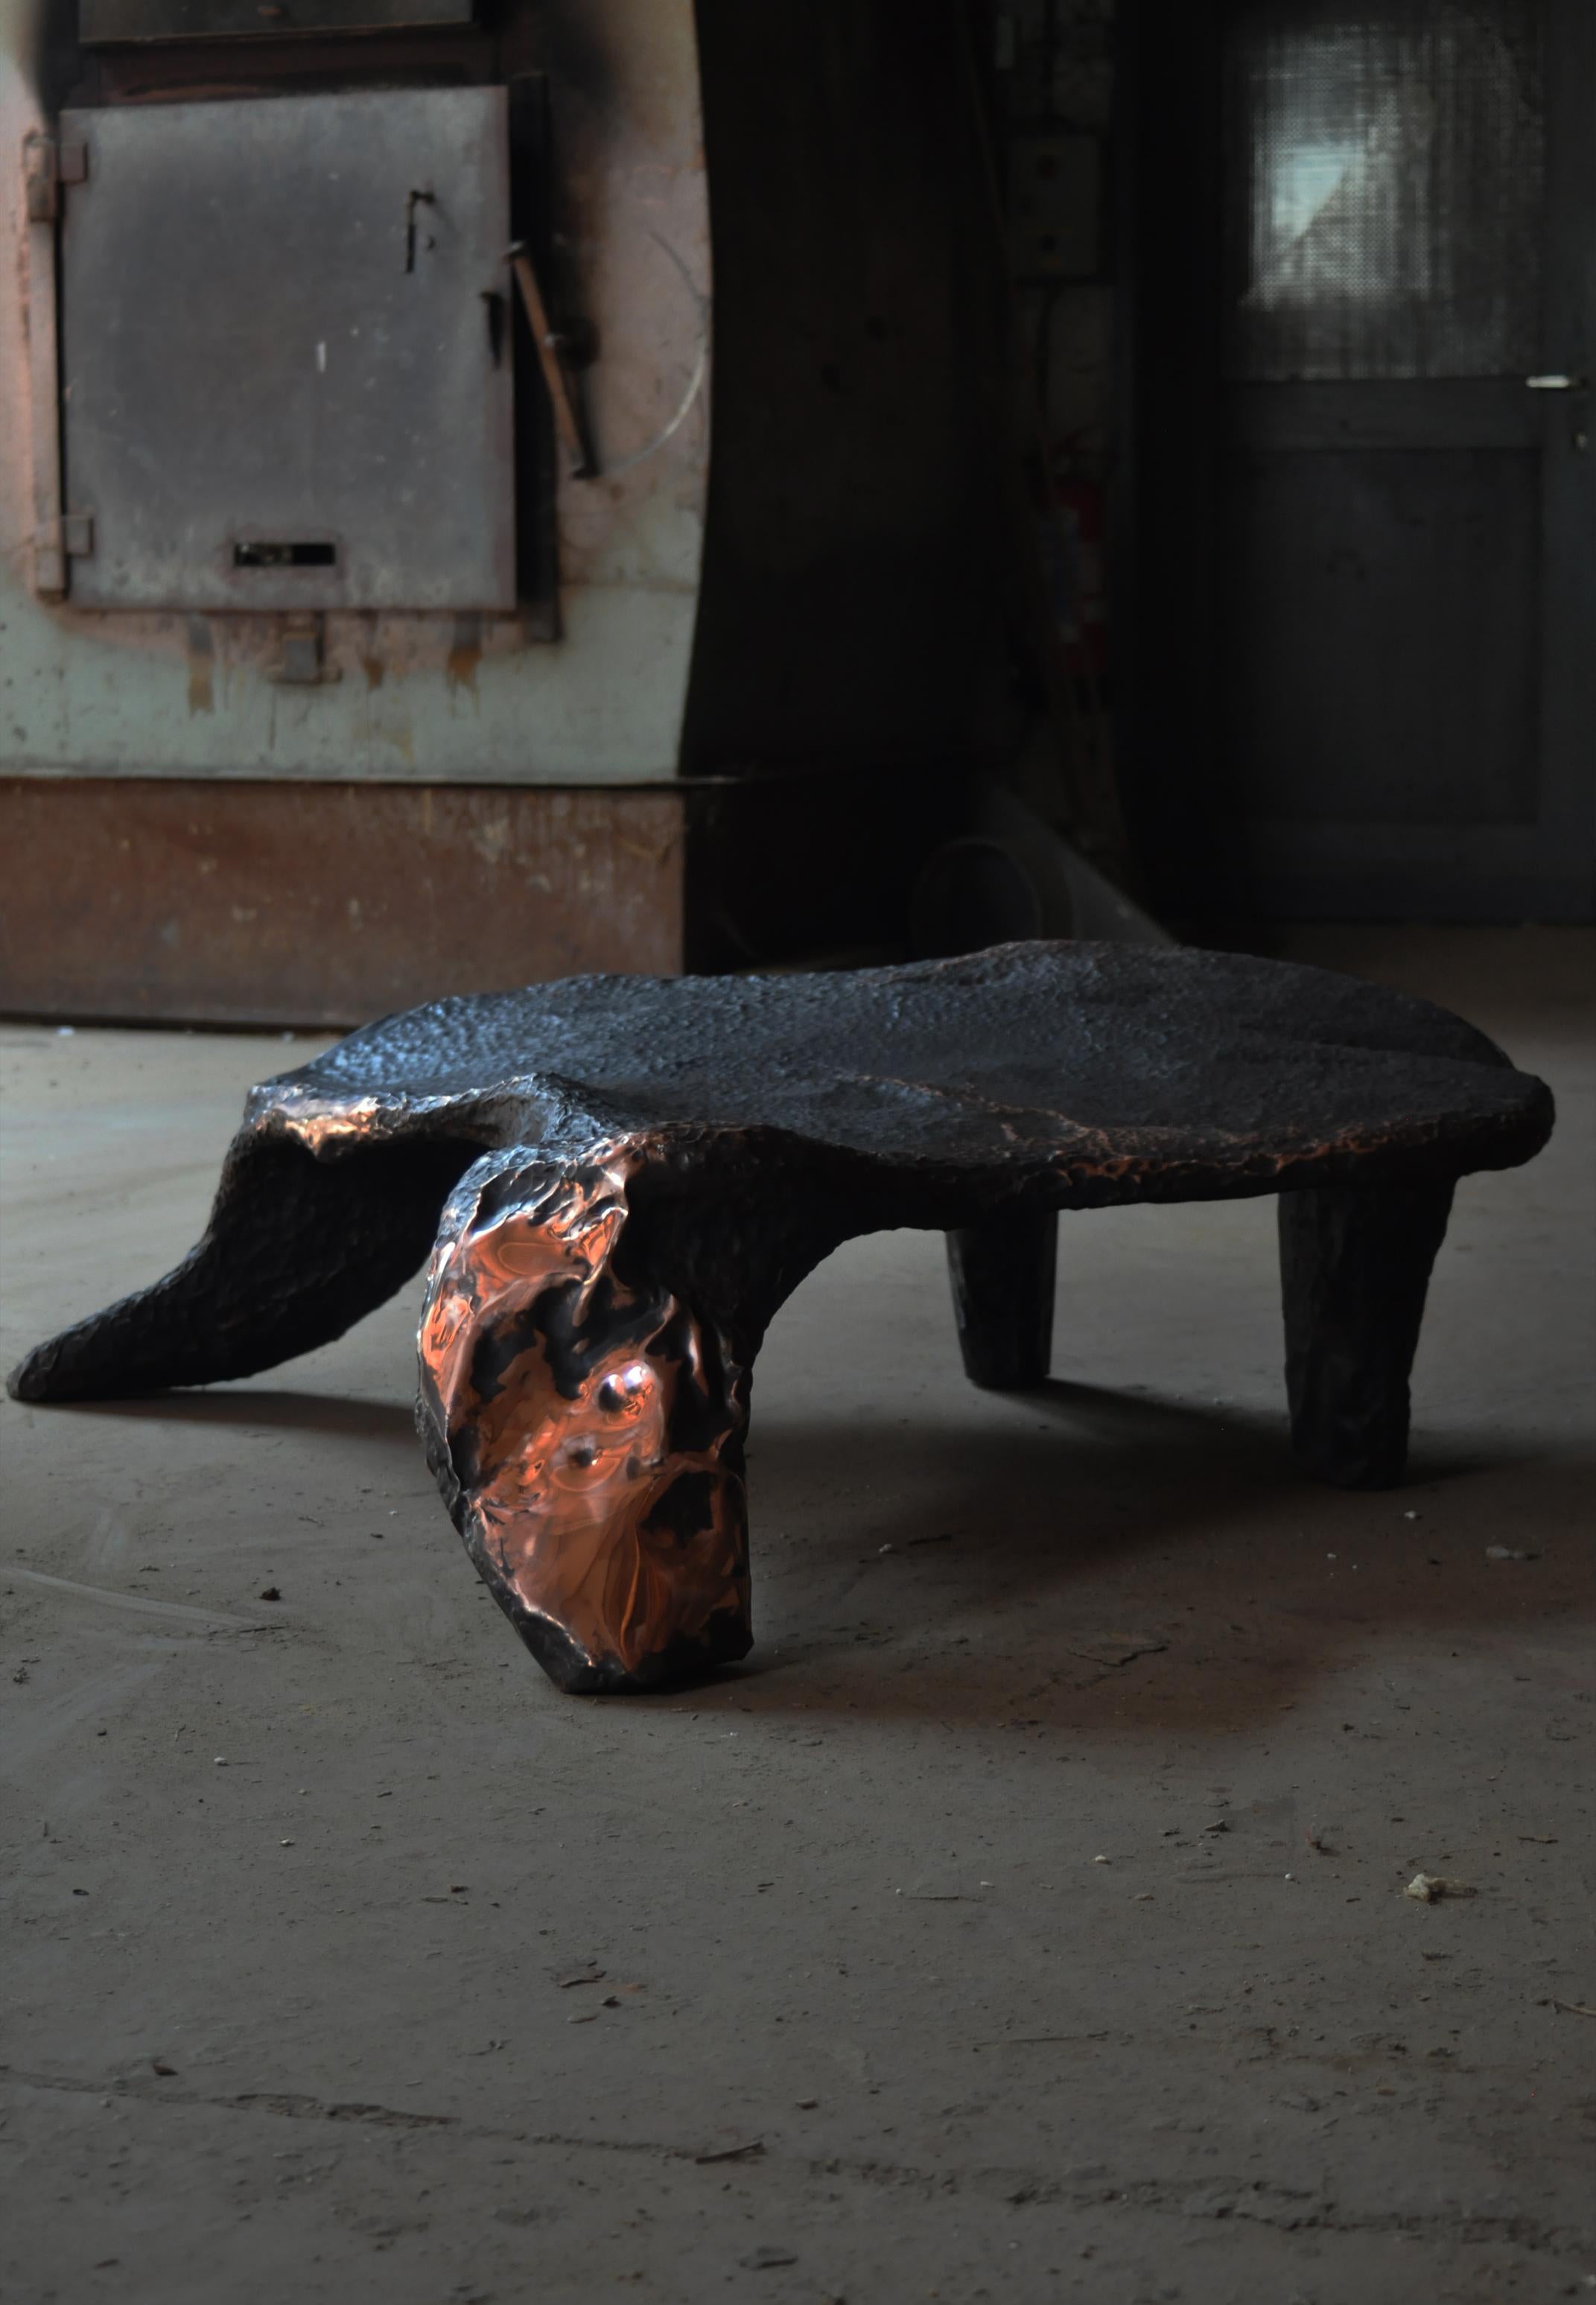 Platypus Low Table by by Marius Ritiu, Allienim
One Of A Kind.
Dimensions: D 180 x W 45 x H 90 cm.
Materials: Wood and copper.

Allienim
The overall effect of this piece is nothing short of magical, combining the ancient history of dragons and